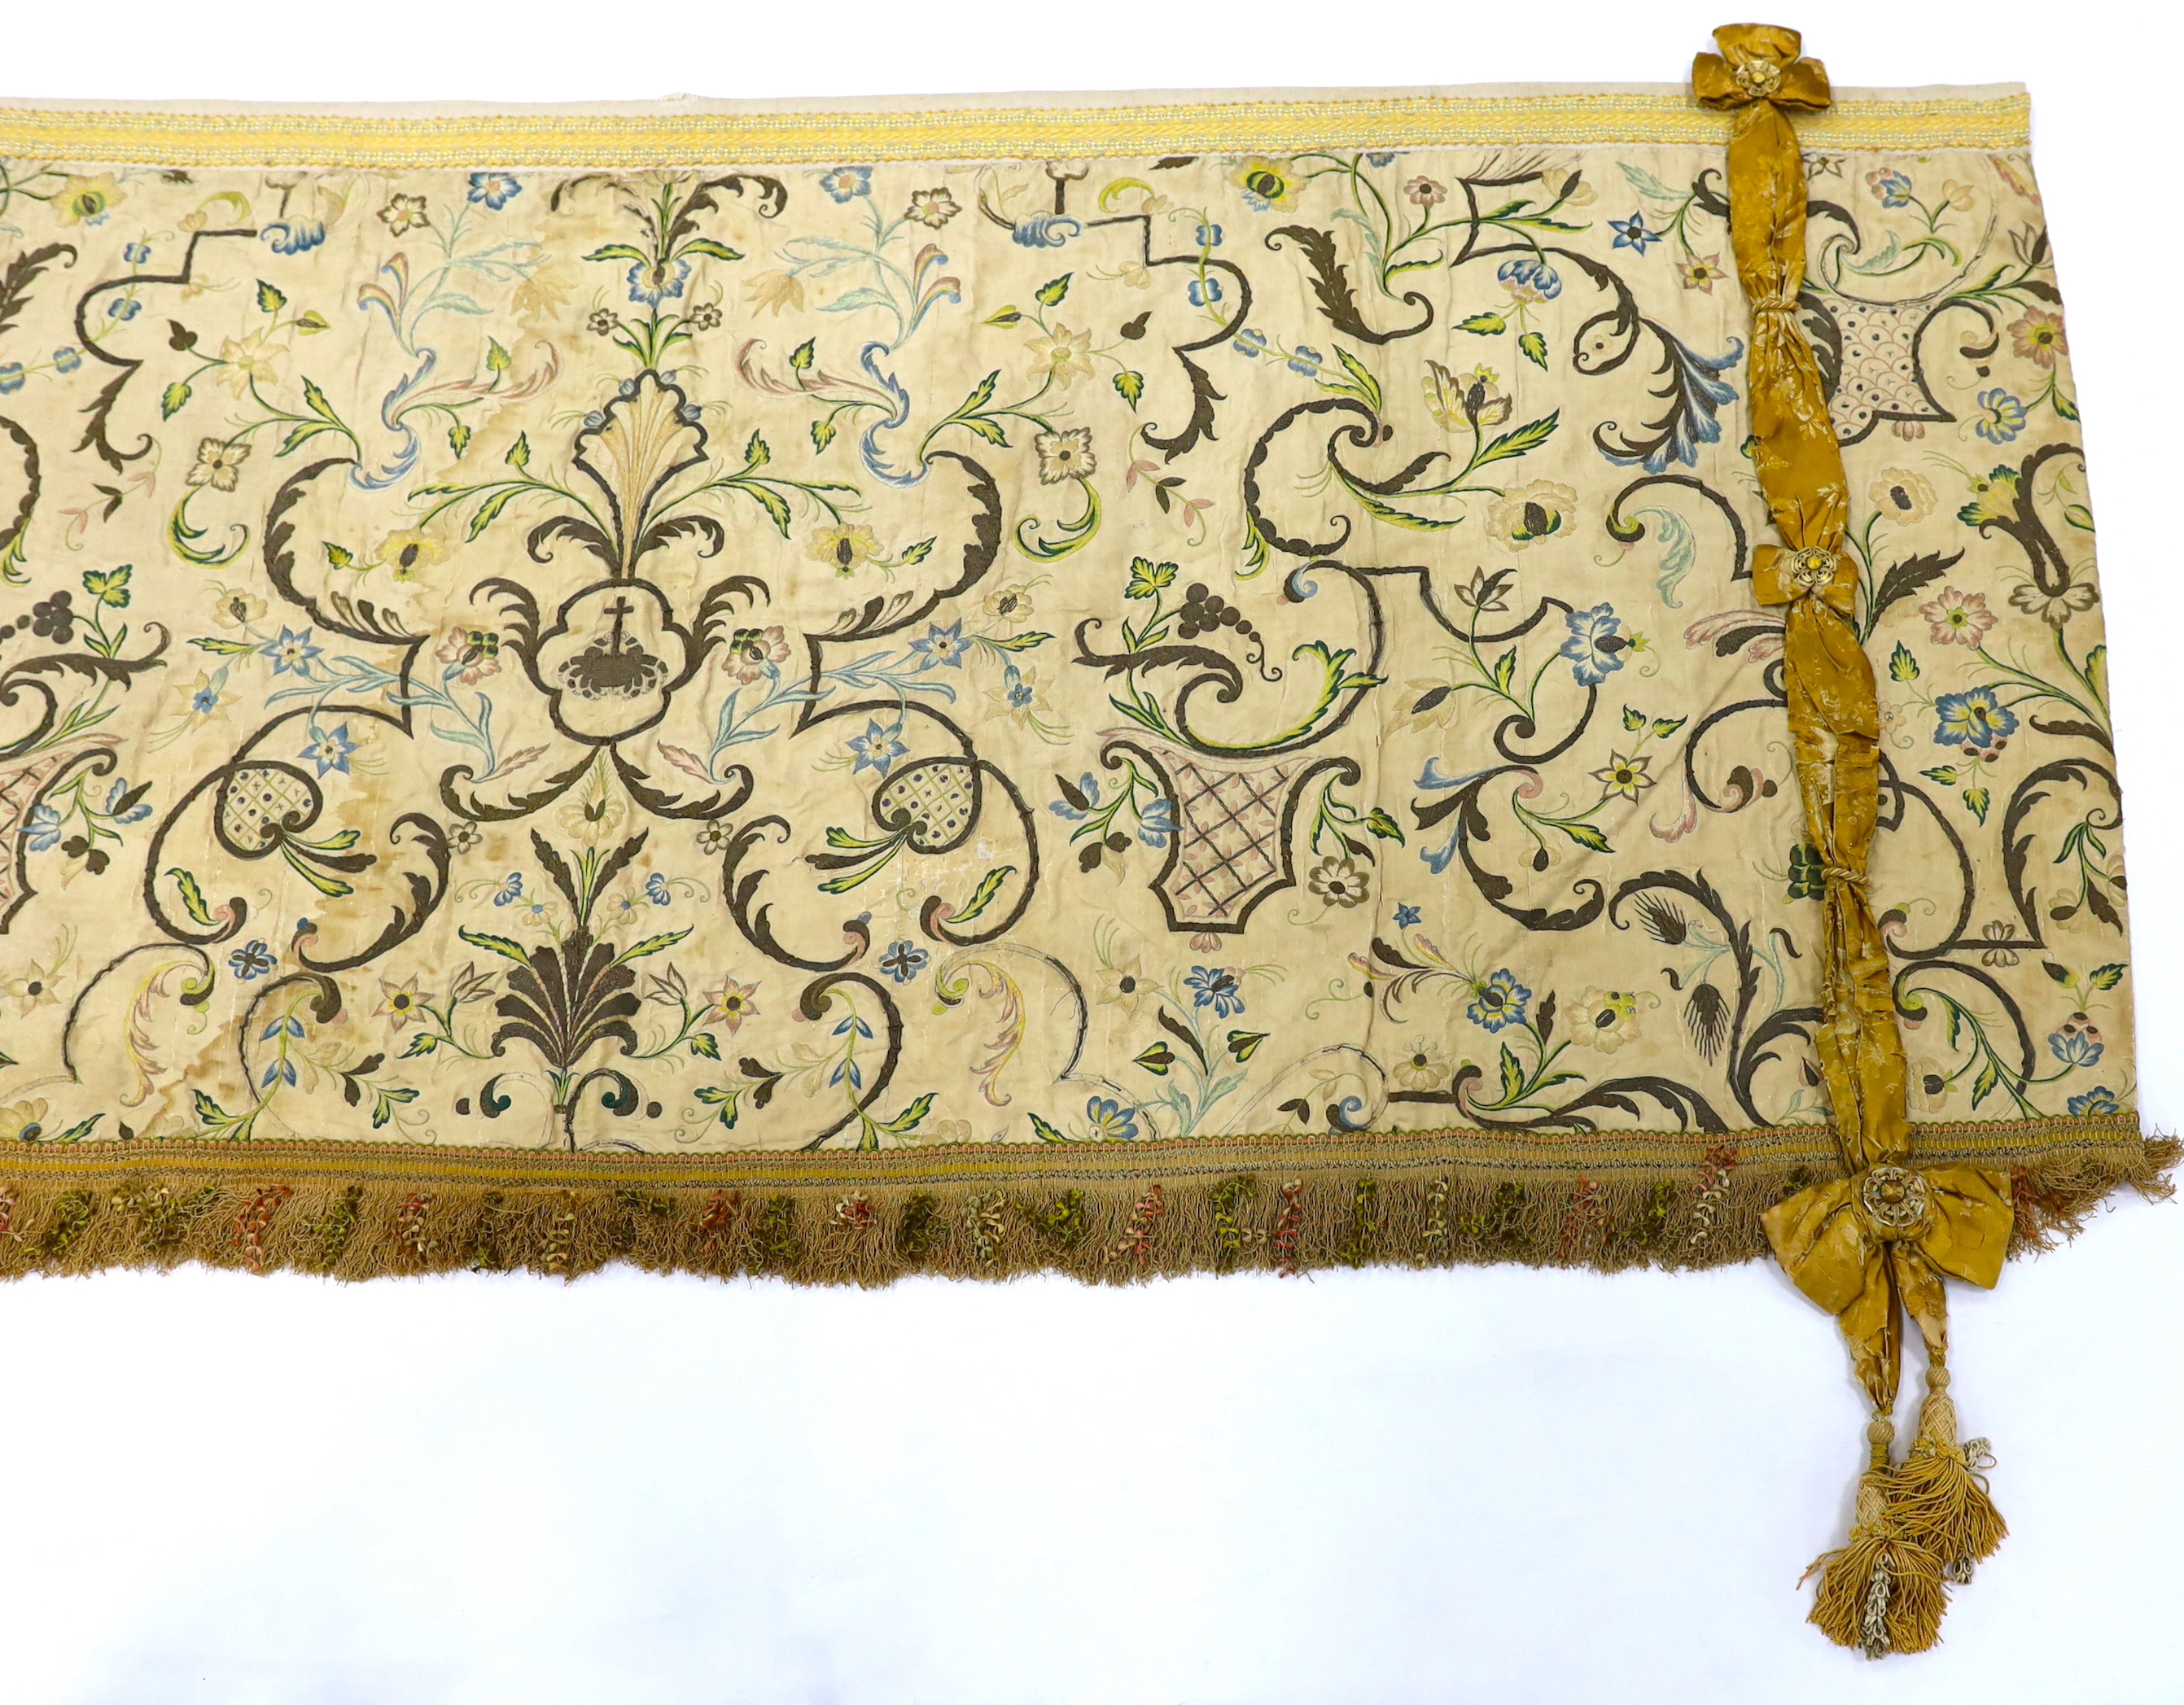 A mid-18th century Continental silk embroidered altar cloth, embroidered with polychrome silks and silver metallic threads in an all-over floral design on cream silk with ornate silk tasselling, (the damask tie backs add